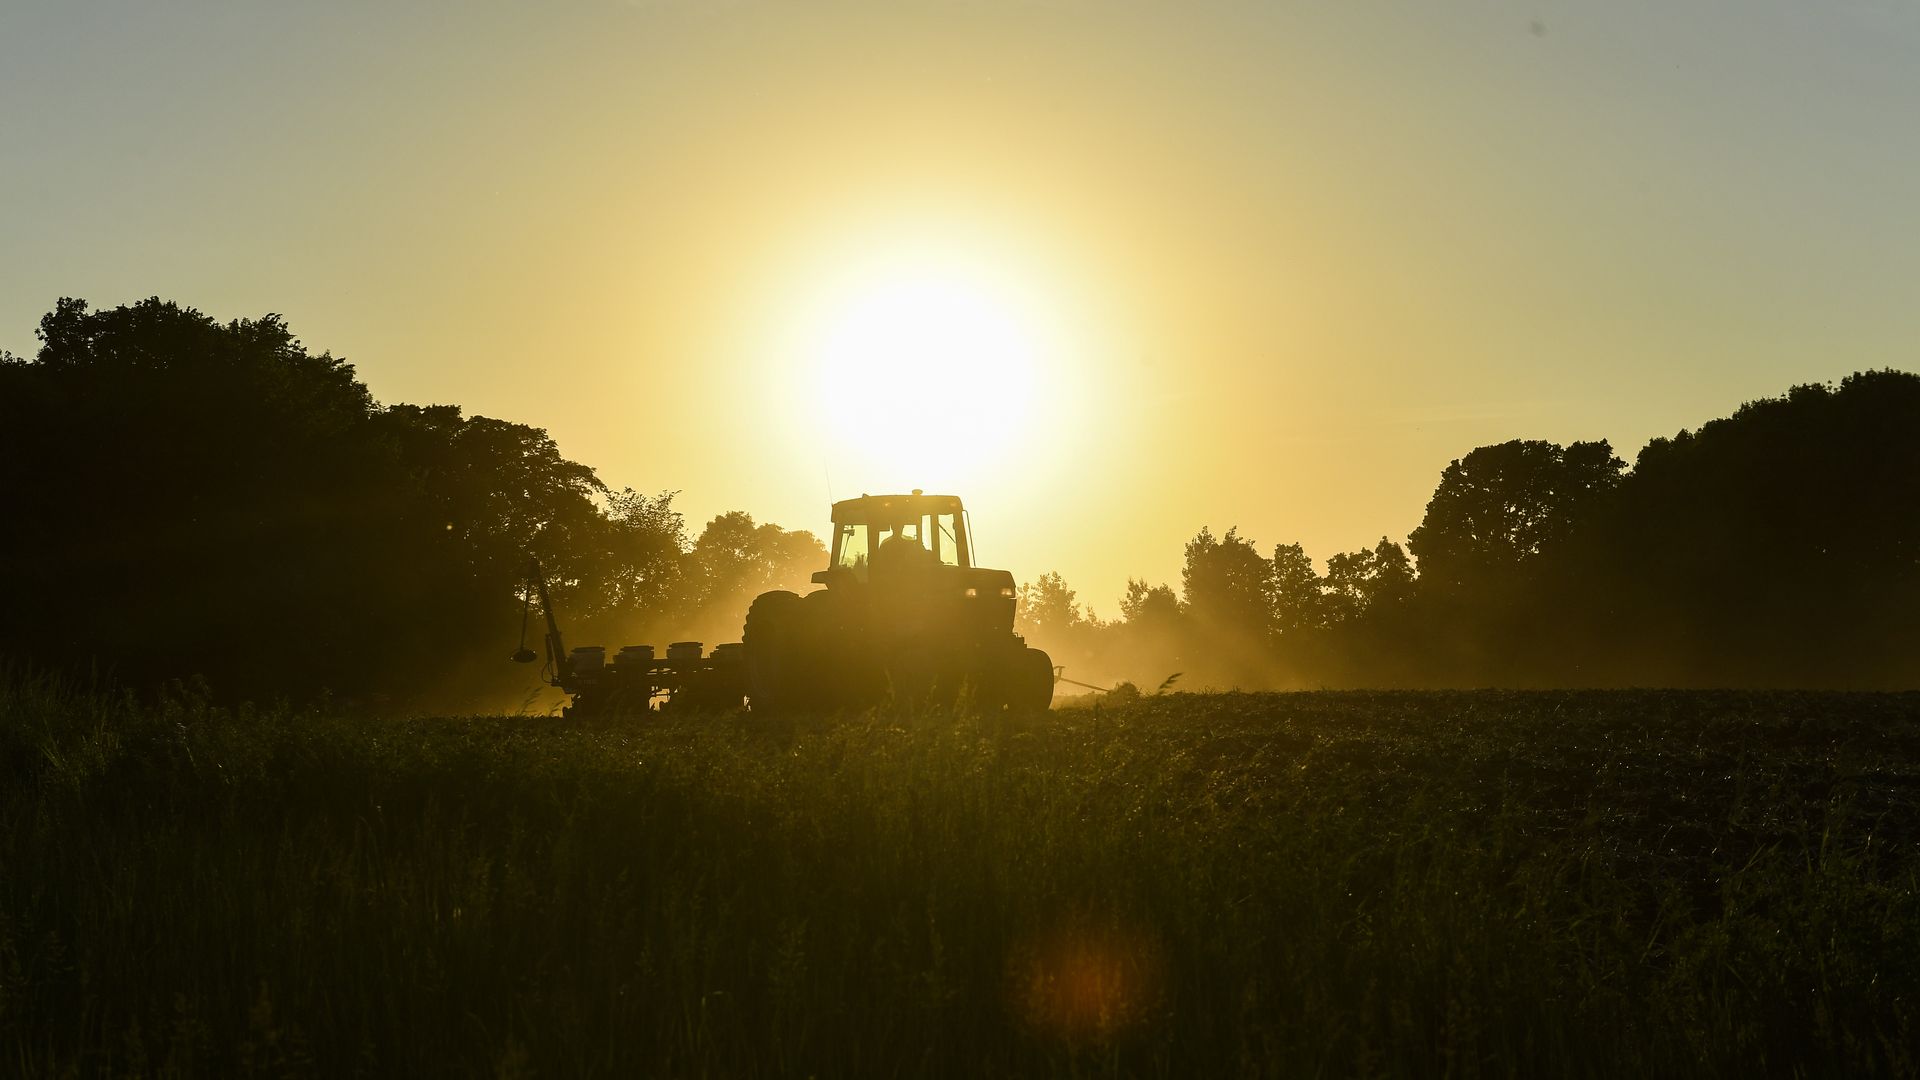 A tractor in the sunlight. 